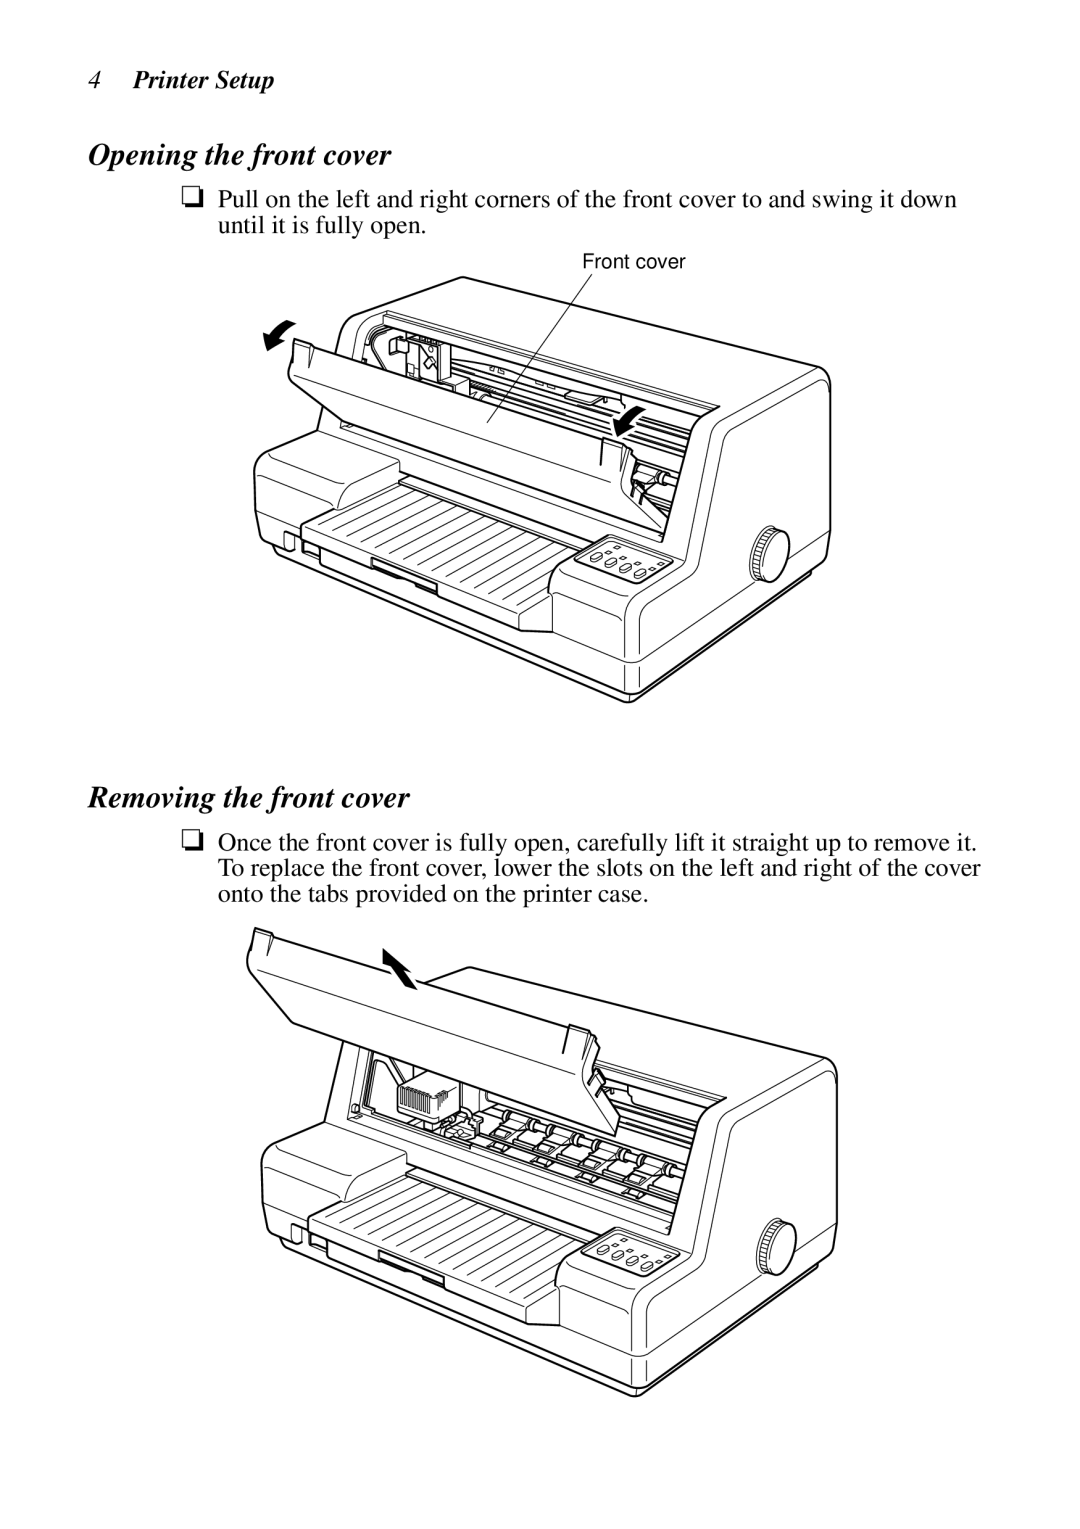 Star Micronics LC-8021 manual Opening the front cover, Removing the front cover, Printer Setup 